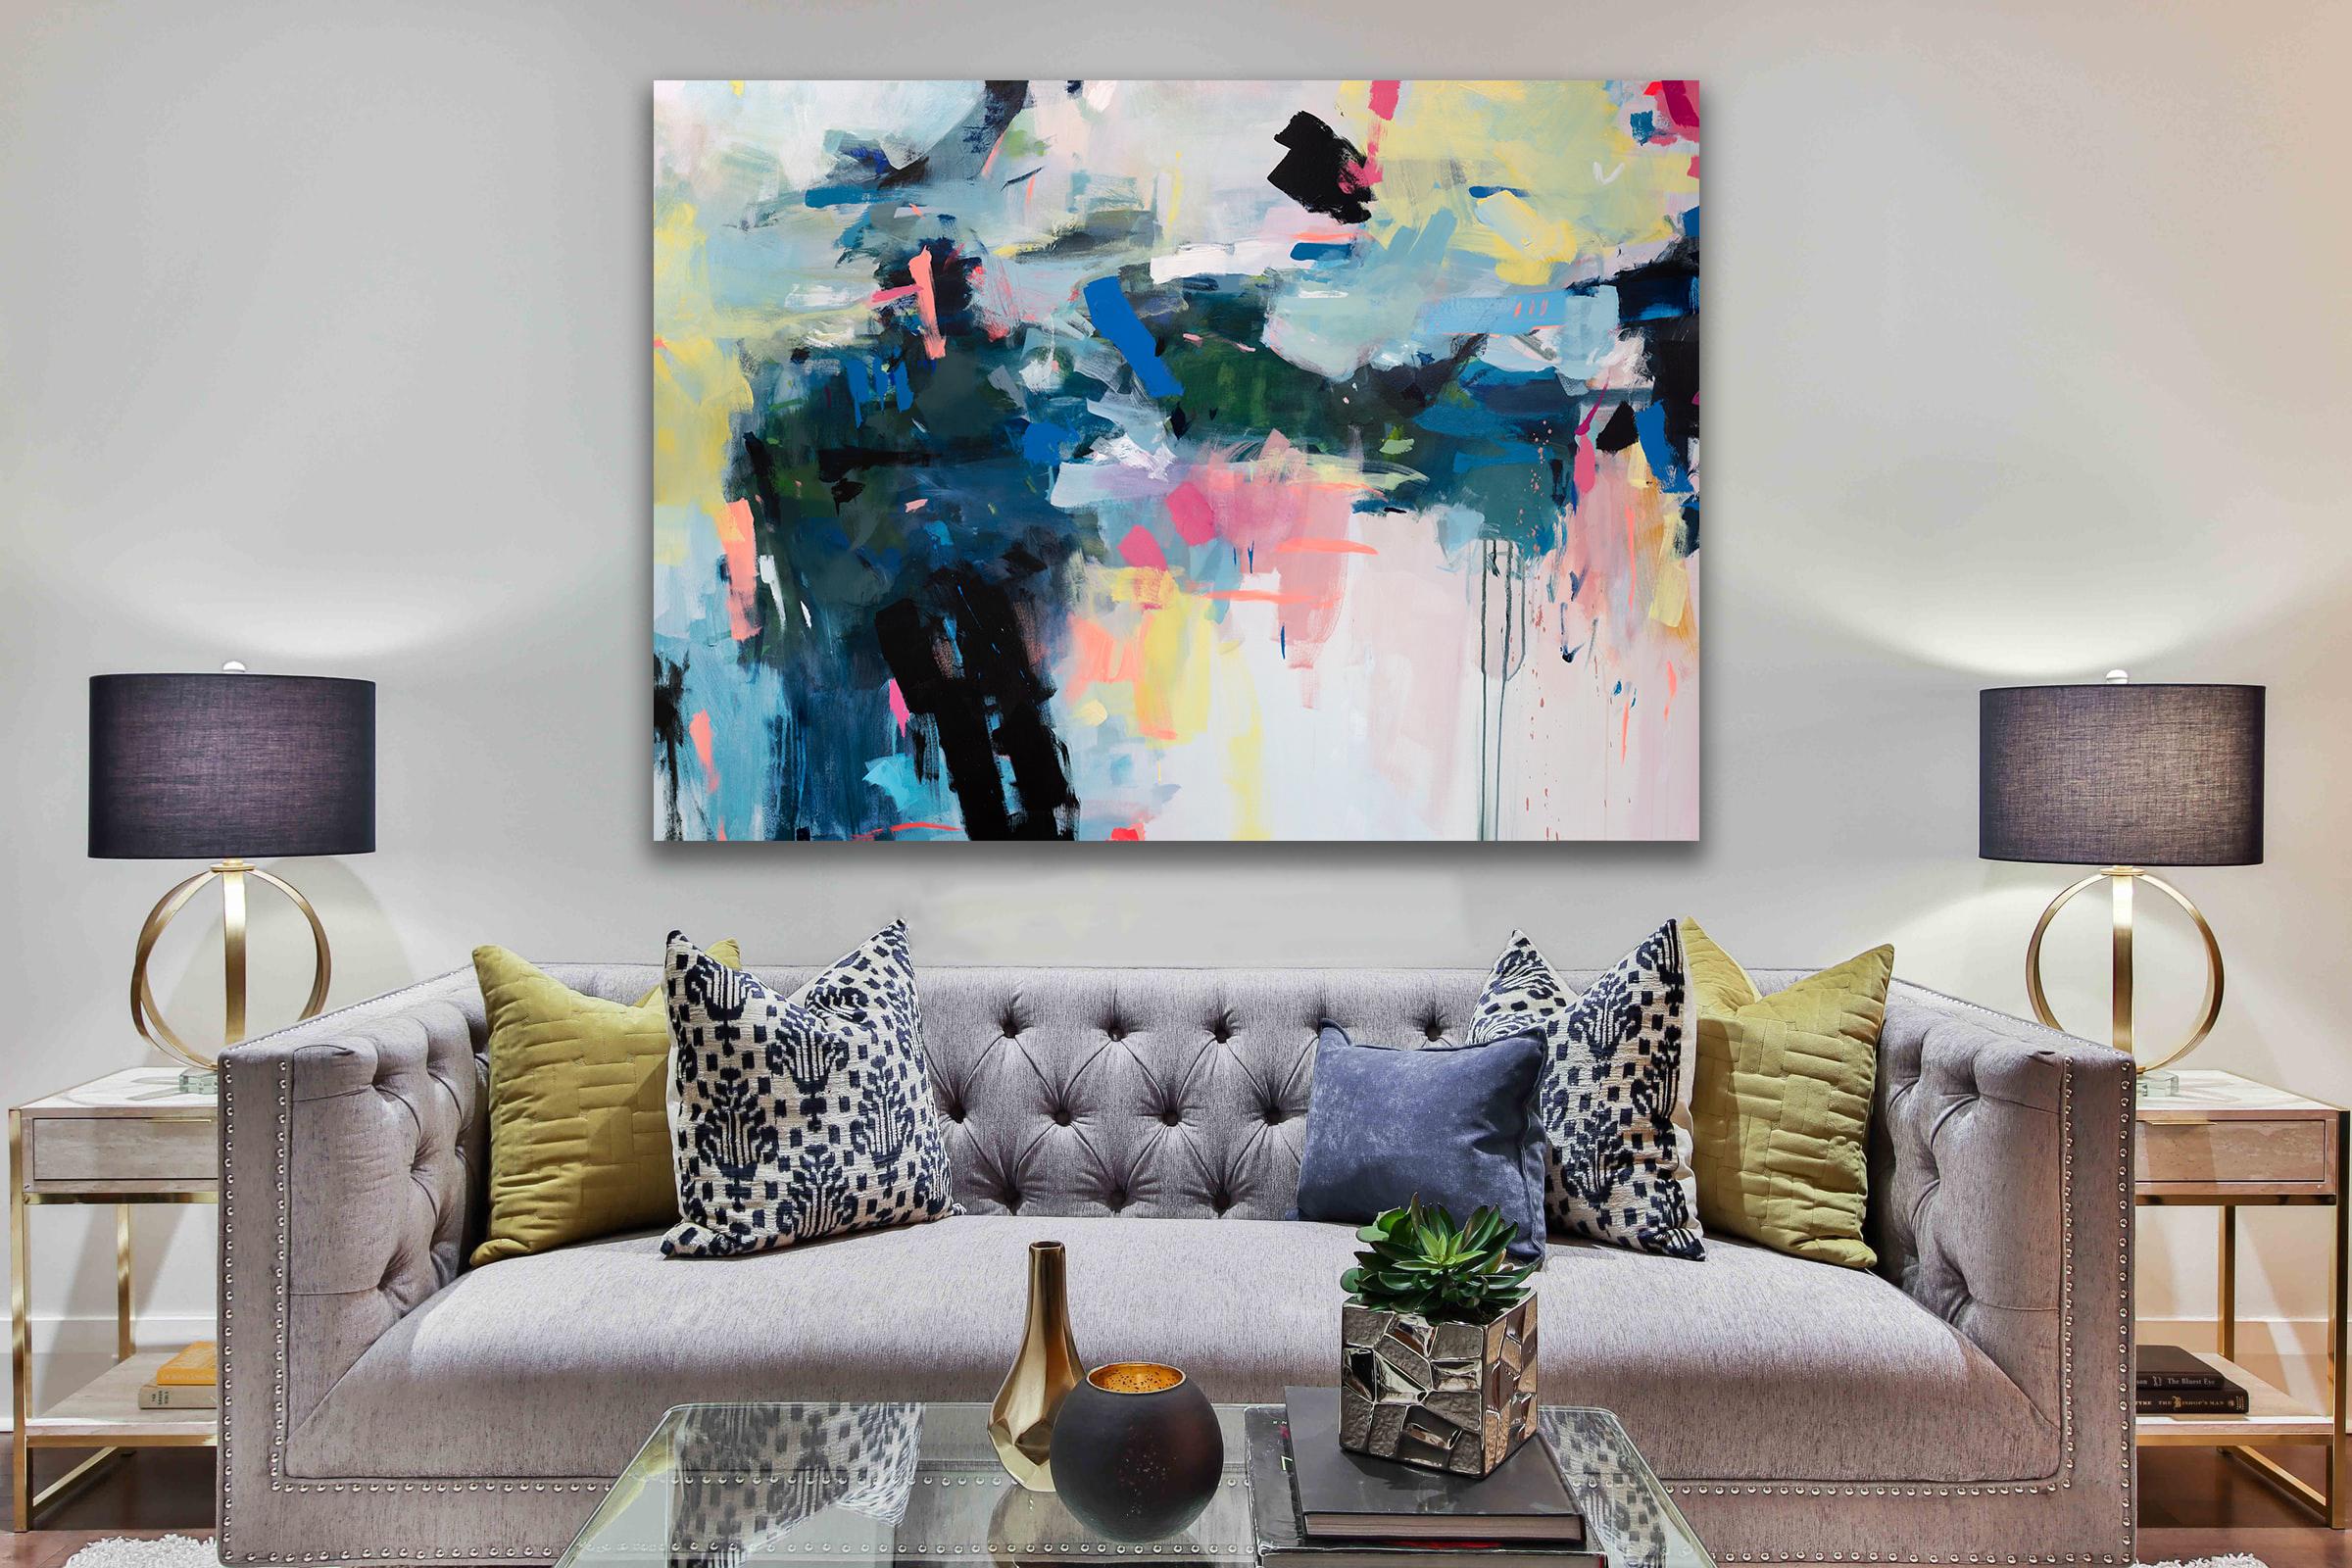 Efflorescence is a brightly-colored, abstract painting by Kelly Rossetti, which measures 48